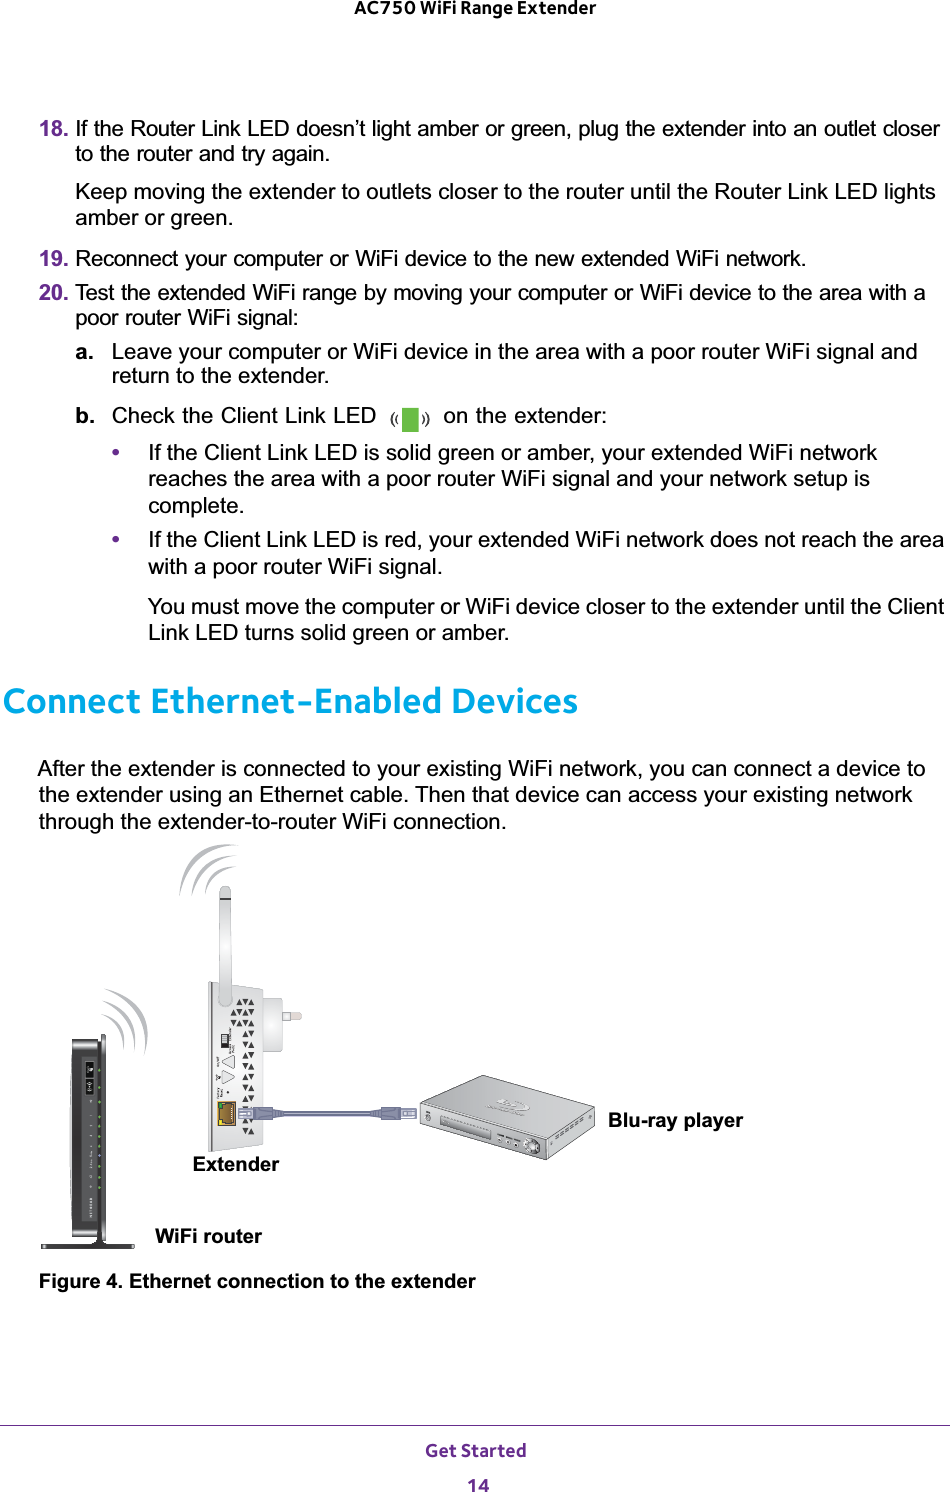 Get Started 14AC750 WiFi Range Extender 18. If the Router Link LED doesn’t light amber or green, plug the extender into an outlet closer to the router and try again.Keep moving the extender to outlets closer to the router until the Router Link LED lights amber or green.19. Reconnect your computer or WiFi device to the new extended WiFi network.20. Test the extended WiFi range by moving your computer or WiFi device to the area with a poor router WiFi signal:a. Leave your computer or WiFi device in the area with a poor router WiFi signal and return to the extender.b.  Check the Client Link LED   on the extender: •If the Client Link LED is solid green or amber, your extended WiFi network reaches the area with a poor router WiFi signal and your network setup is complete.•If the Client Link LED is red, your extended WiFi network does not reach the area with a poor router WiFi signal.You must move the computer or WiFi device closer to the extender until the Client Link LED turns solid green or amber.Connect Ethernet-Enabled DevicesAfter the extender is connected to your existing WiFi network, you can connect a device to the extender using an Ethernet cable. Then that device can access your existing network through the extender-to-router WiFi connection.WiFi routerExtenderBlu-ray playerFigure 4. Ethernet connection to the extender